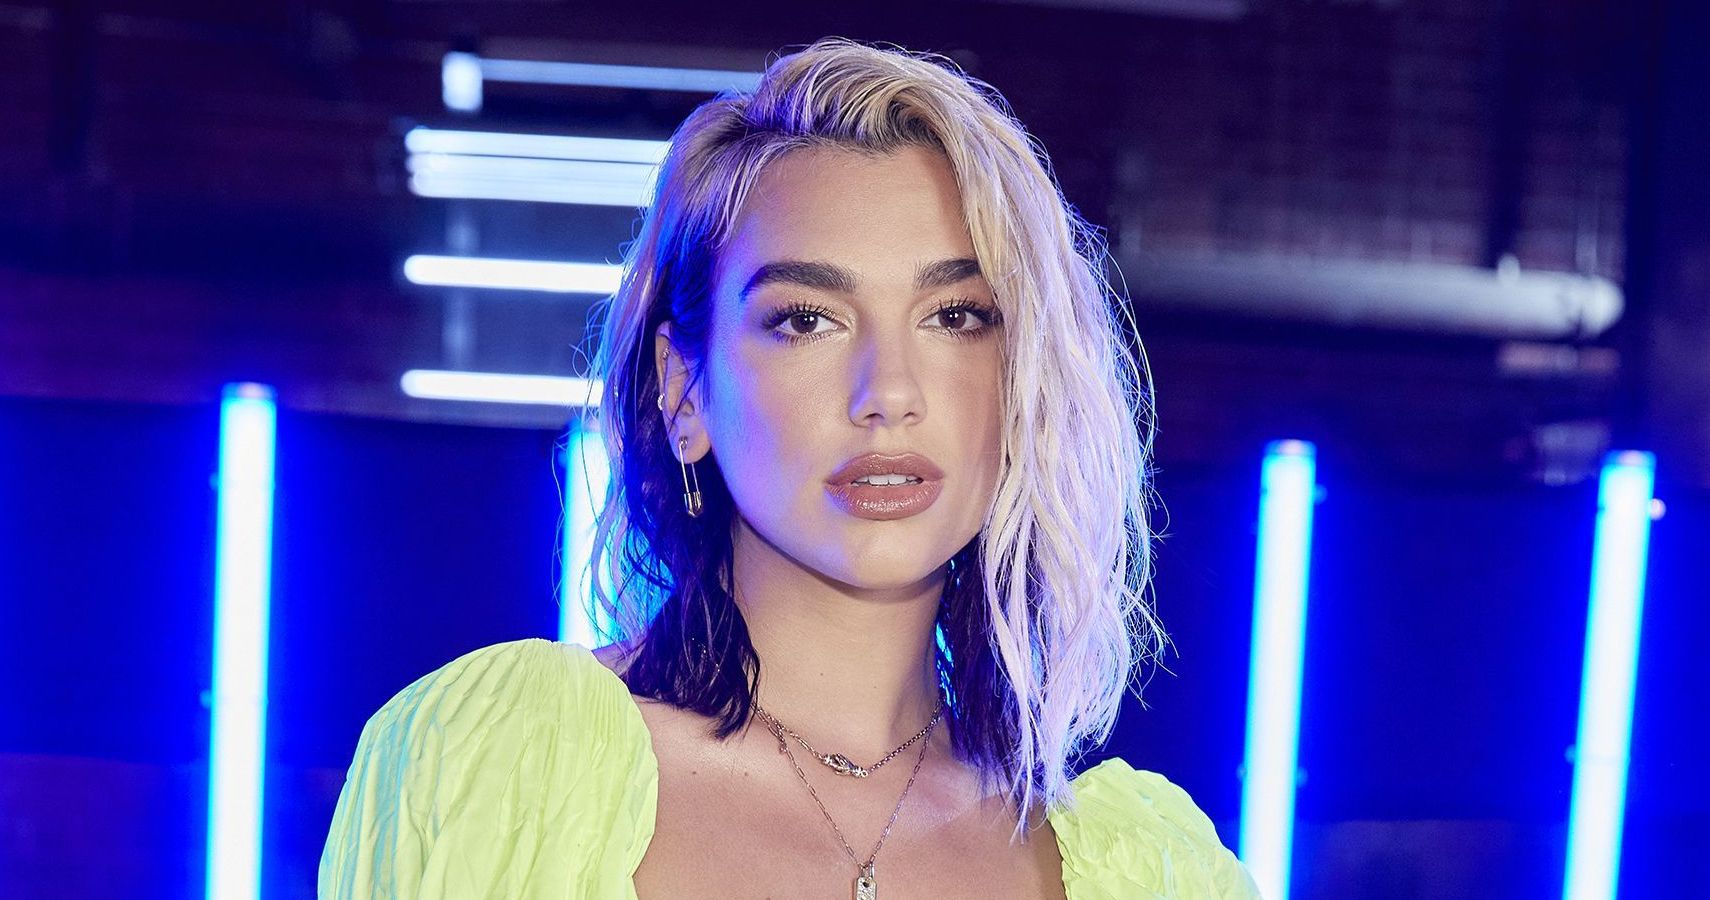 Dua Lipa's Upcoming Tour Has A VIP Ticket That Lets You Battle Her In DDR